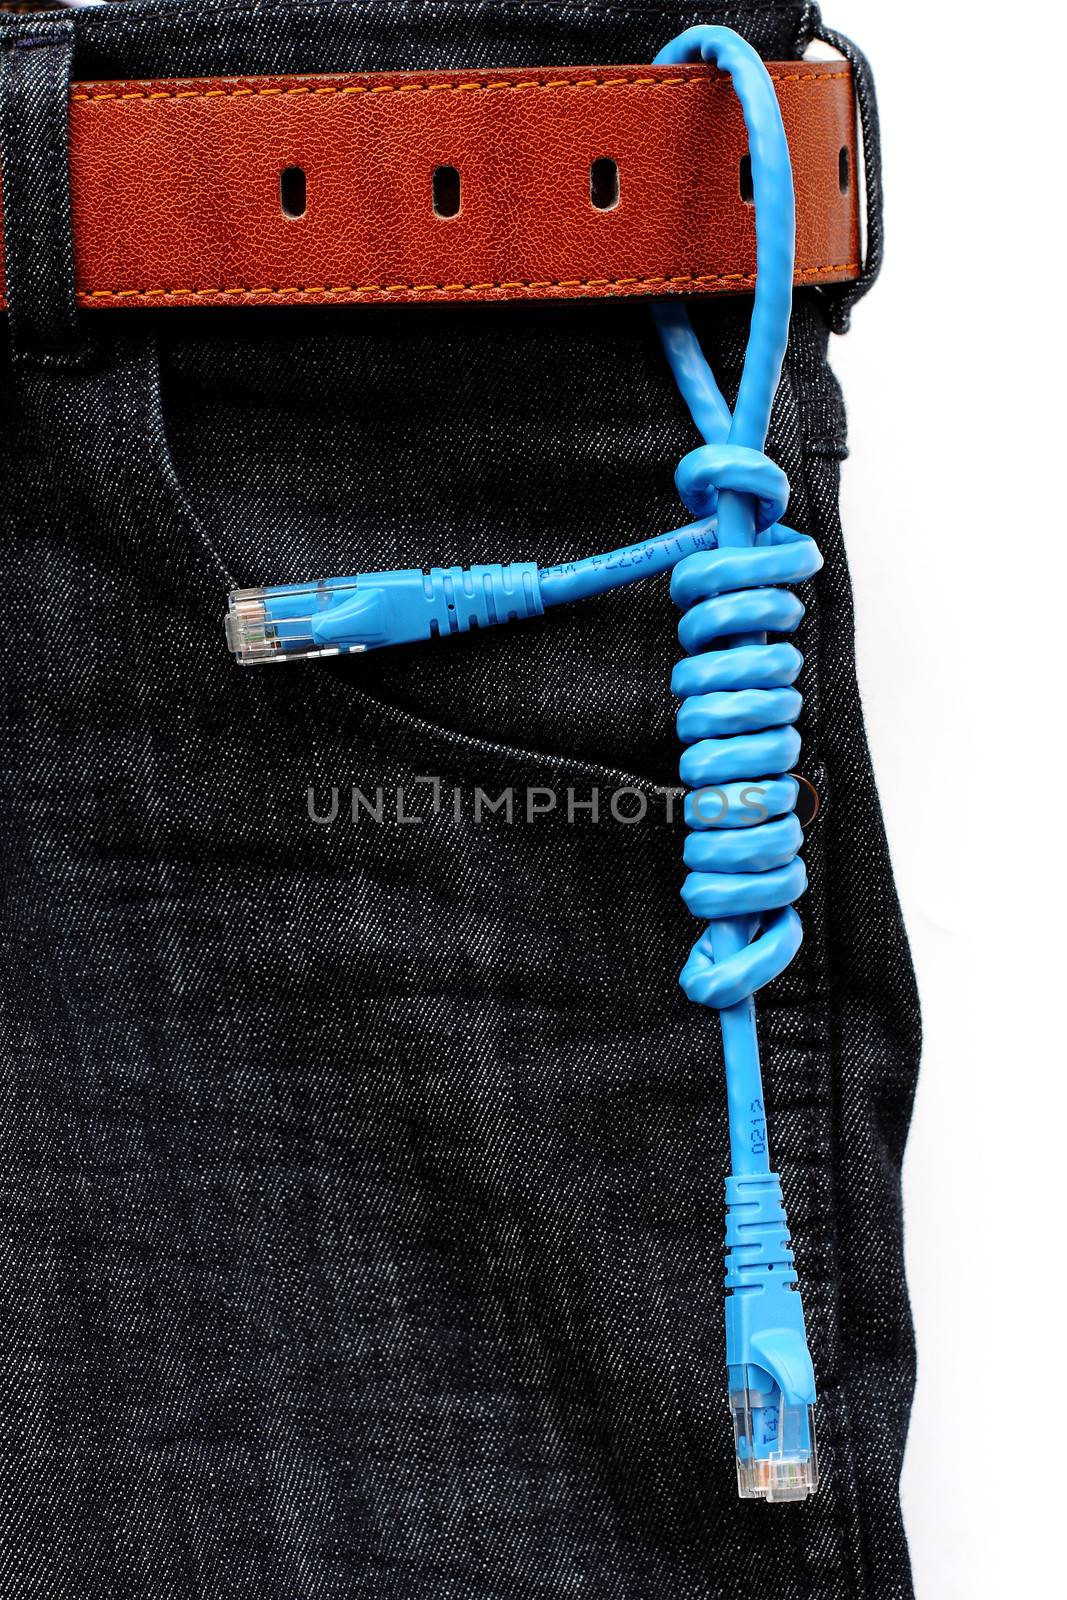 USB cable on jeans background